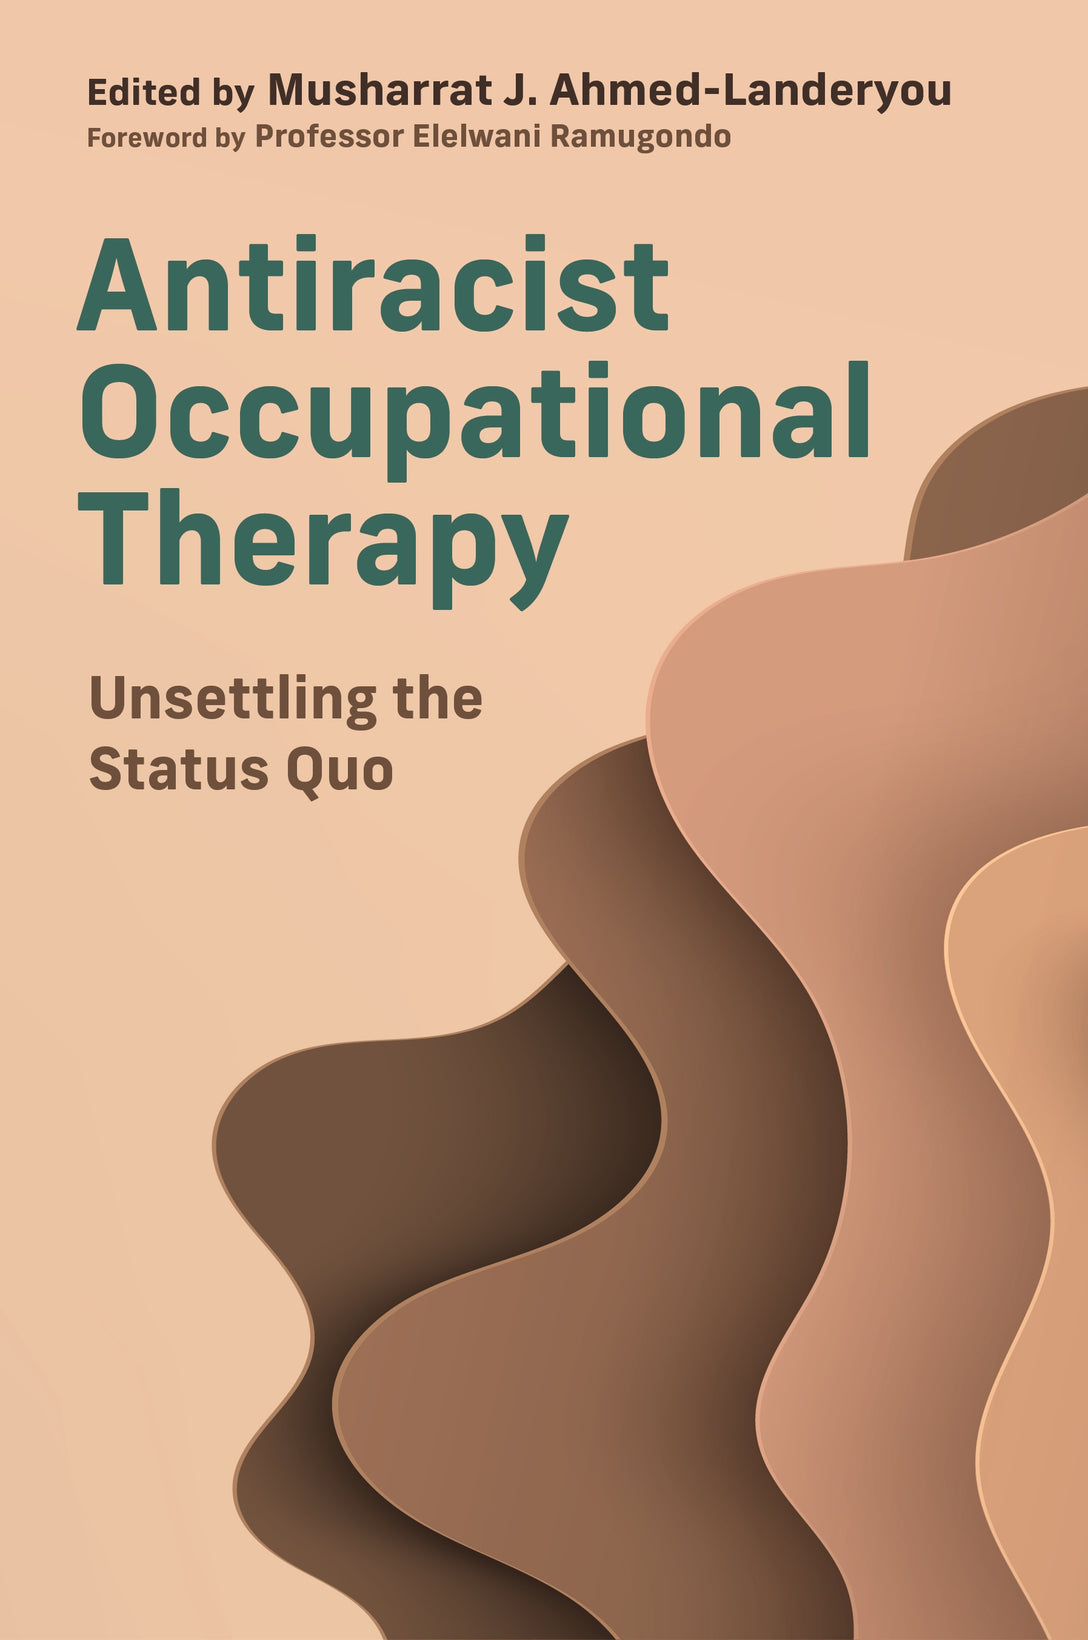 Antiracist Occupational Therapy by Musharrat J. Ahmed-Landeryou,  Various